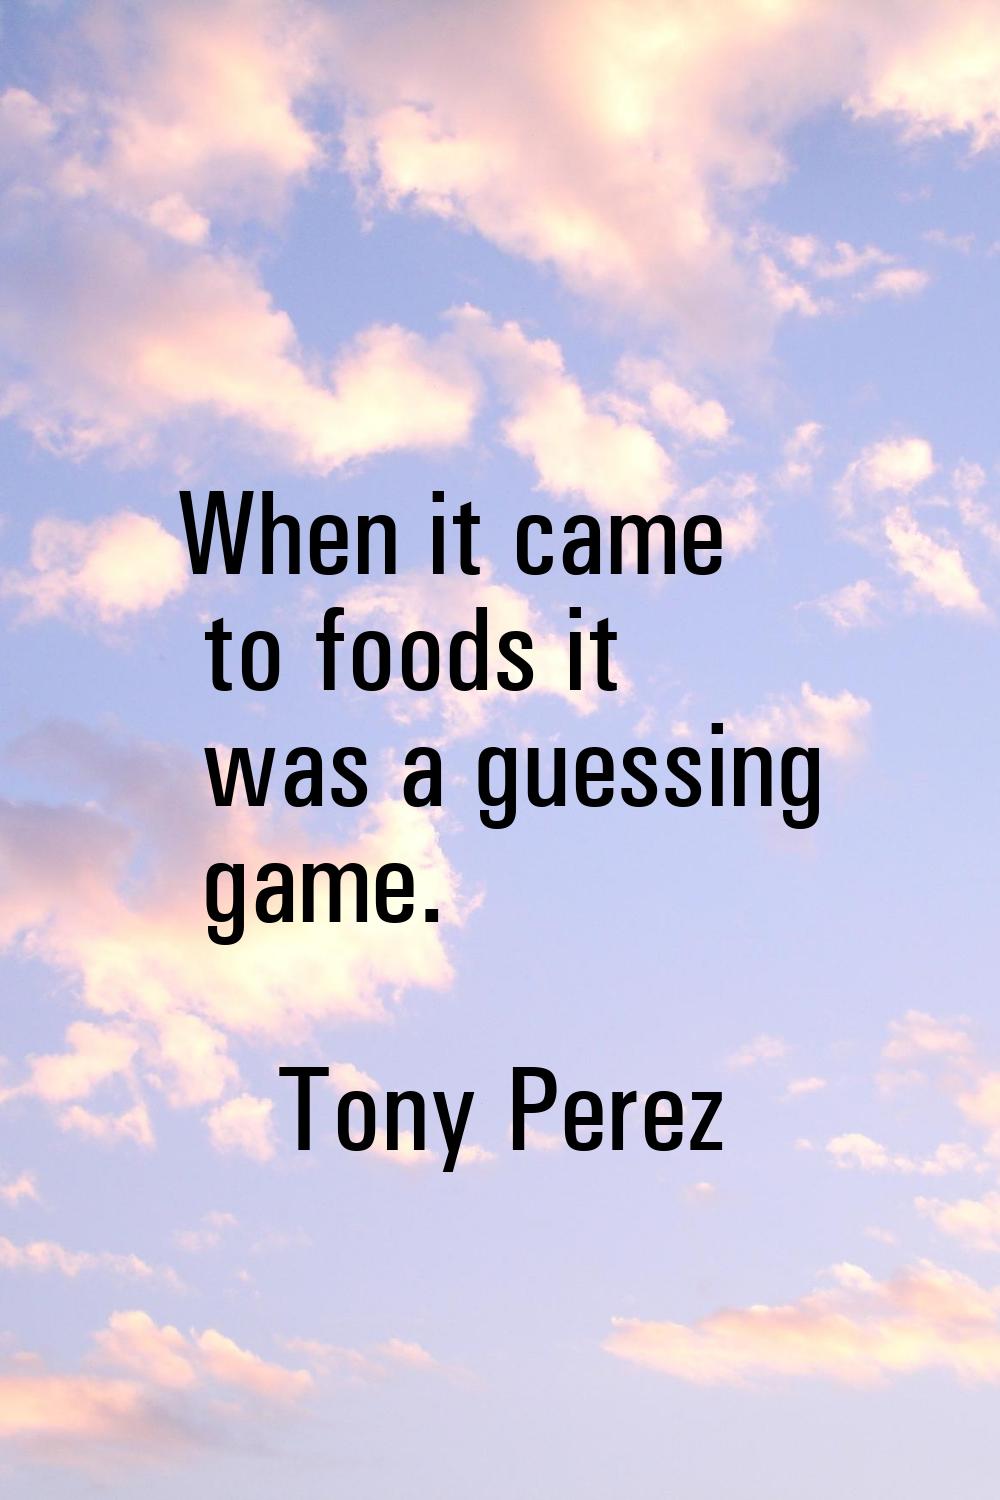 When it came to foods it was a guessing game.